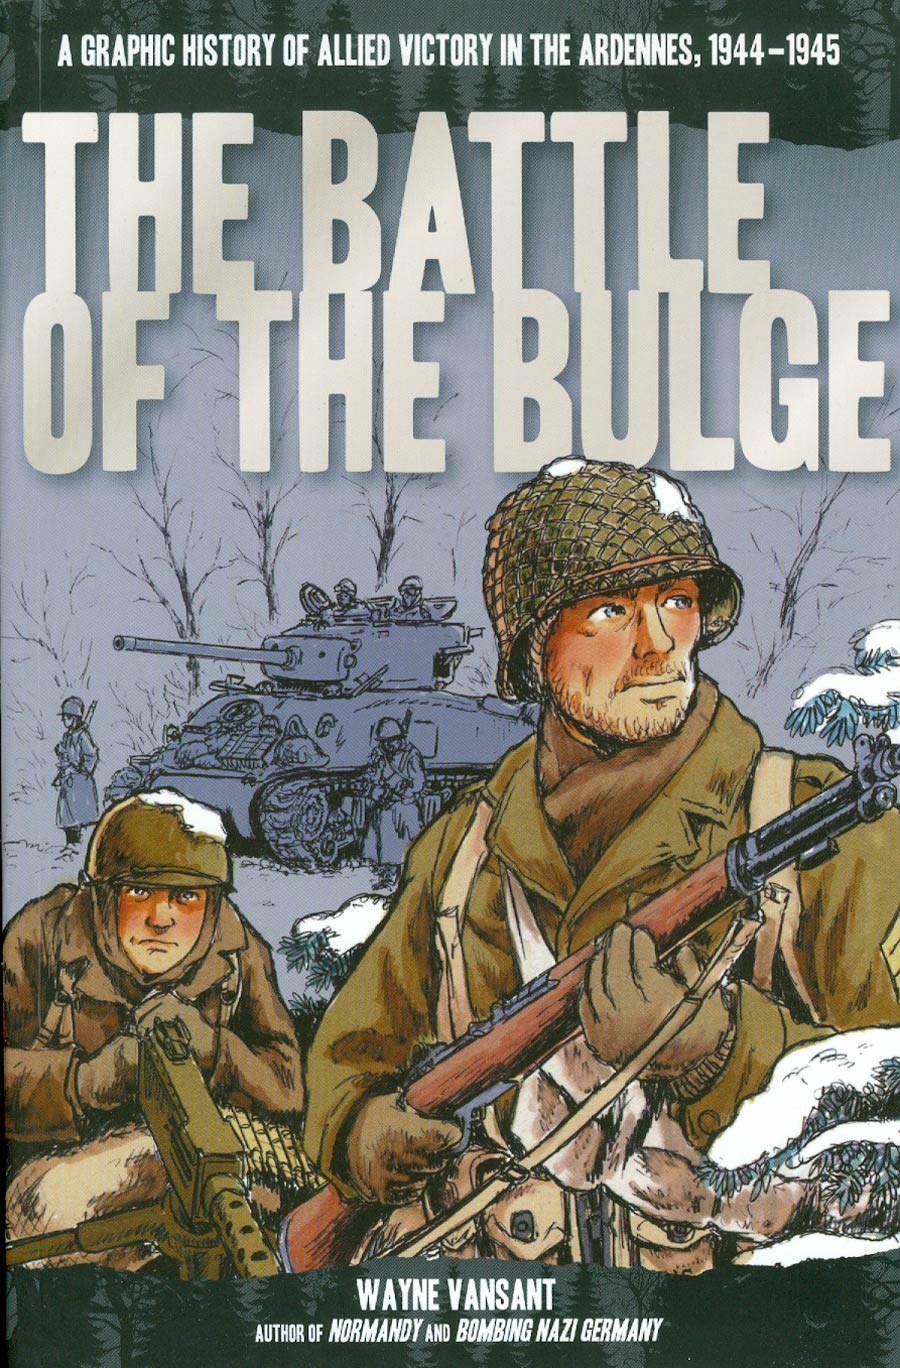 Battle Of The Bulge A Graphic History Of The Allied Victory In The Ardennes 1944-1945 GN